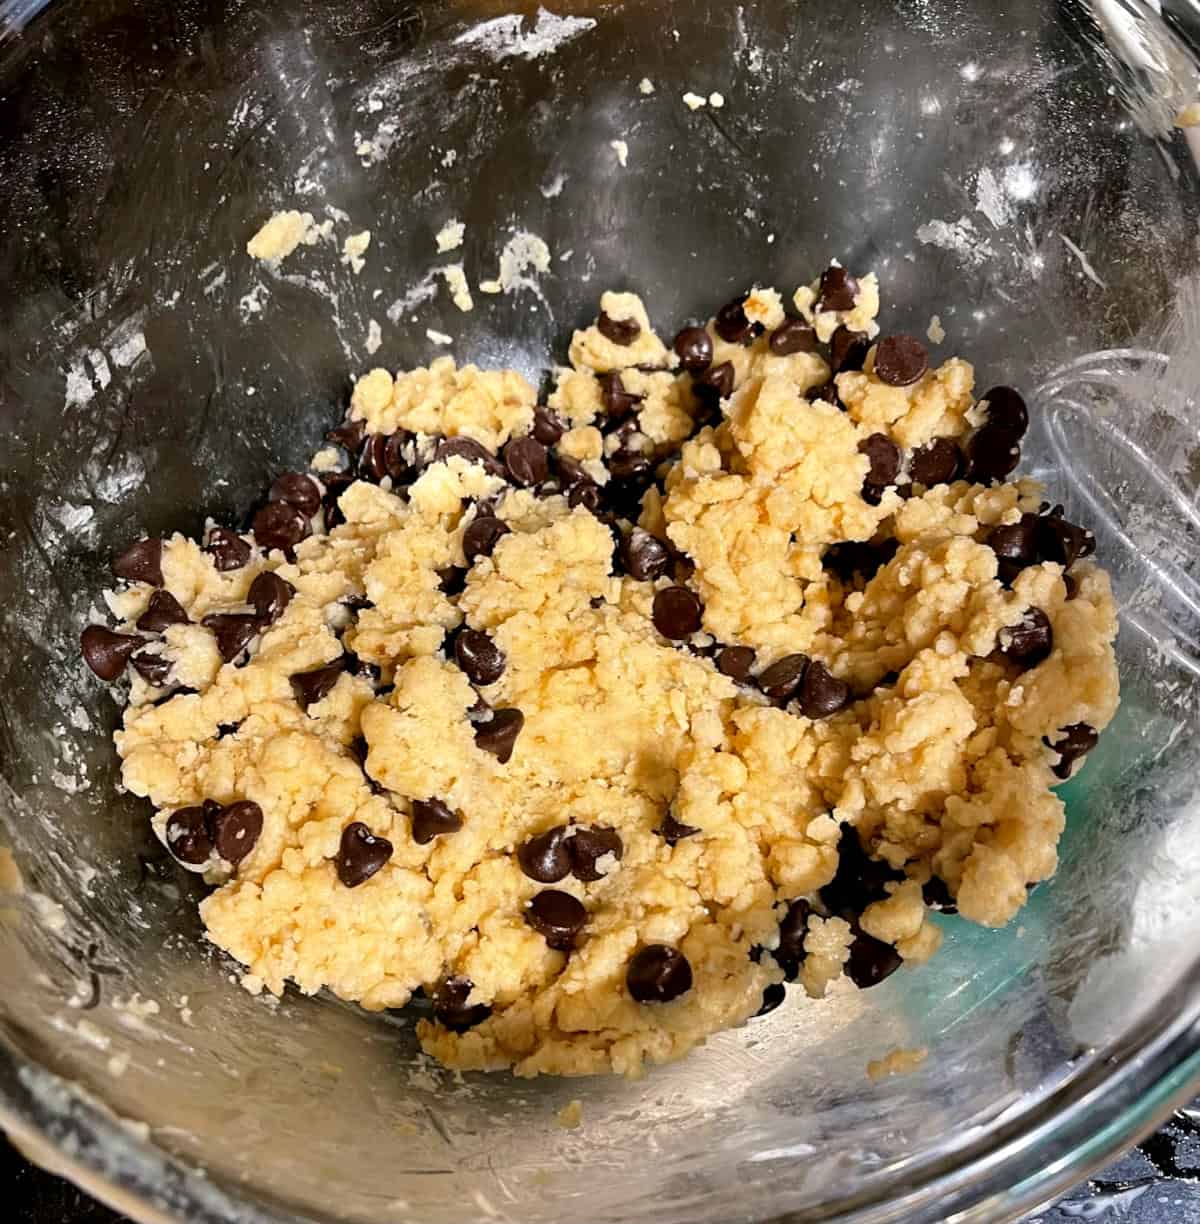 Cookie dough in bowl.